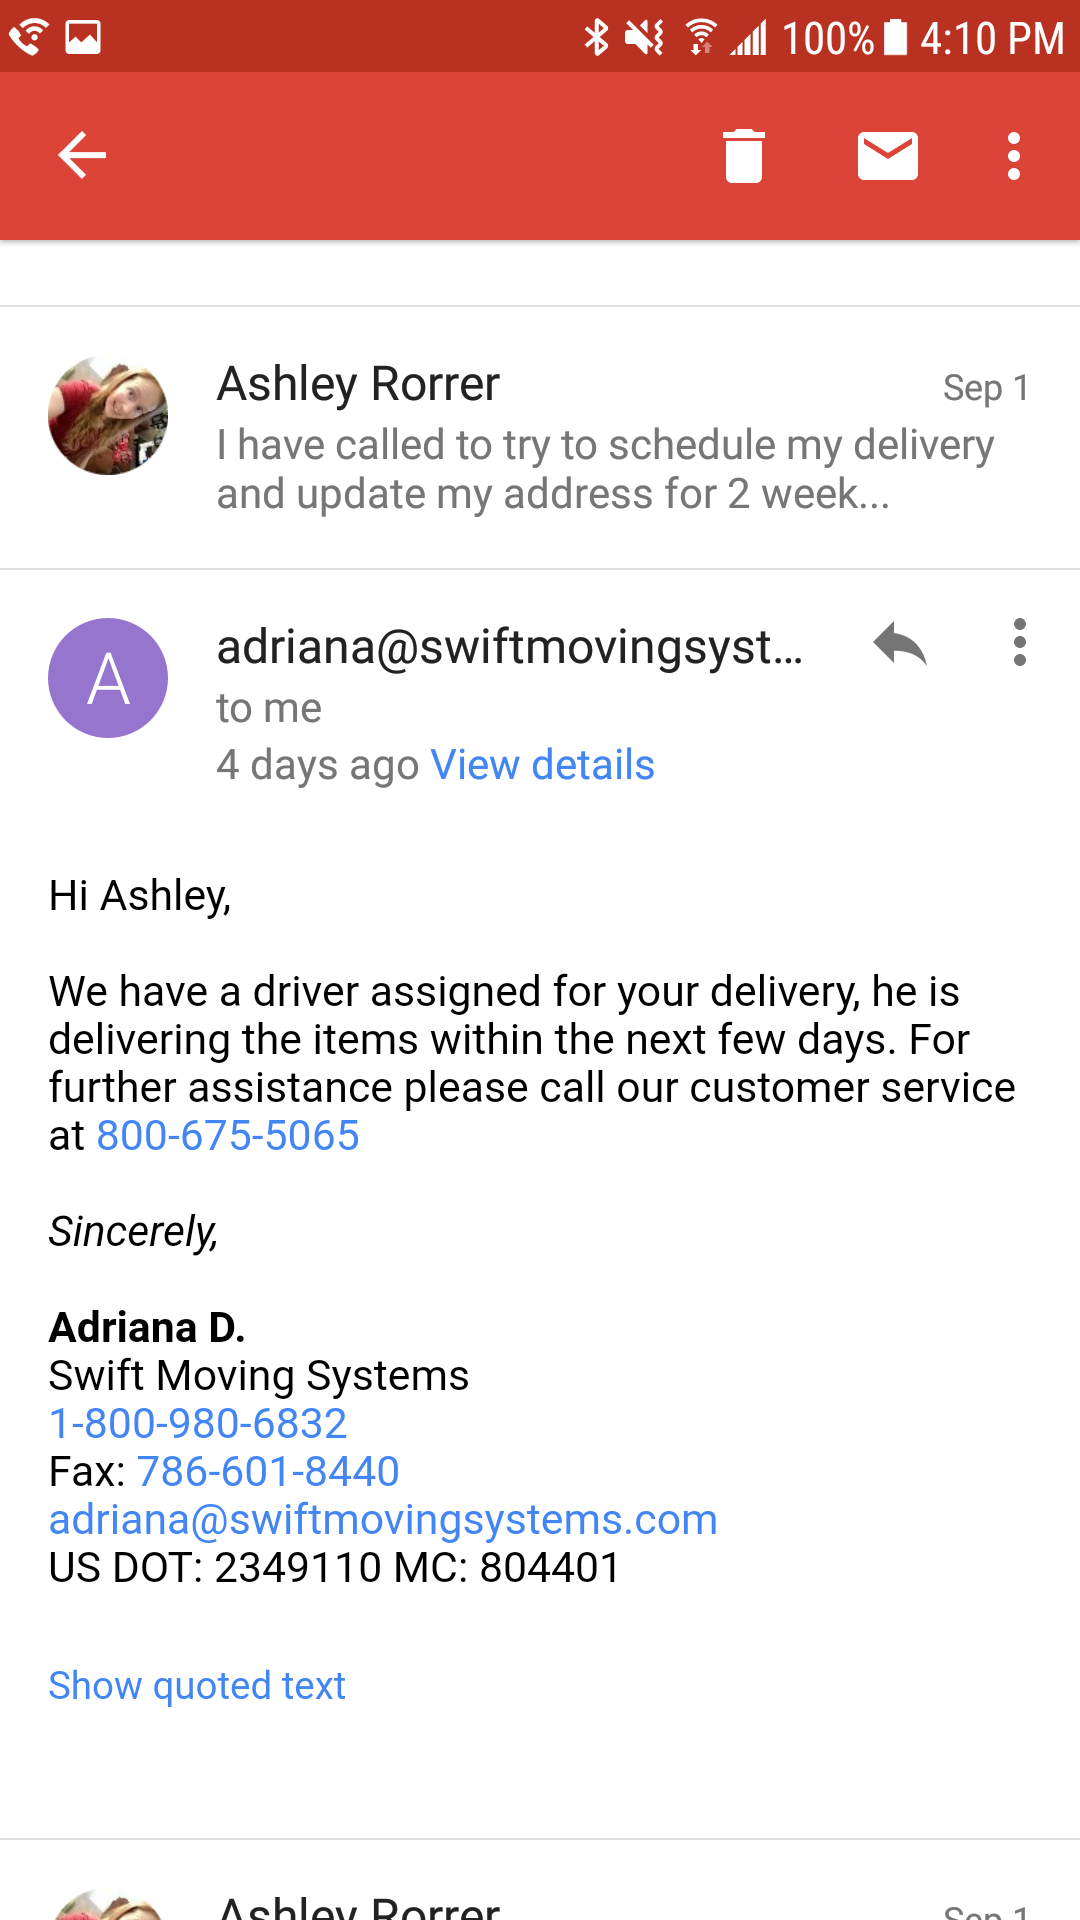 Email stating my items are in transit